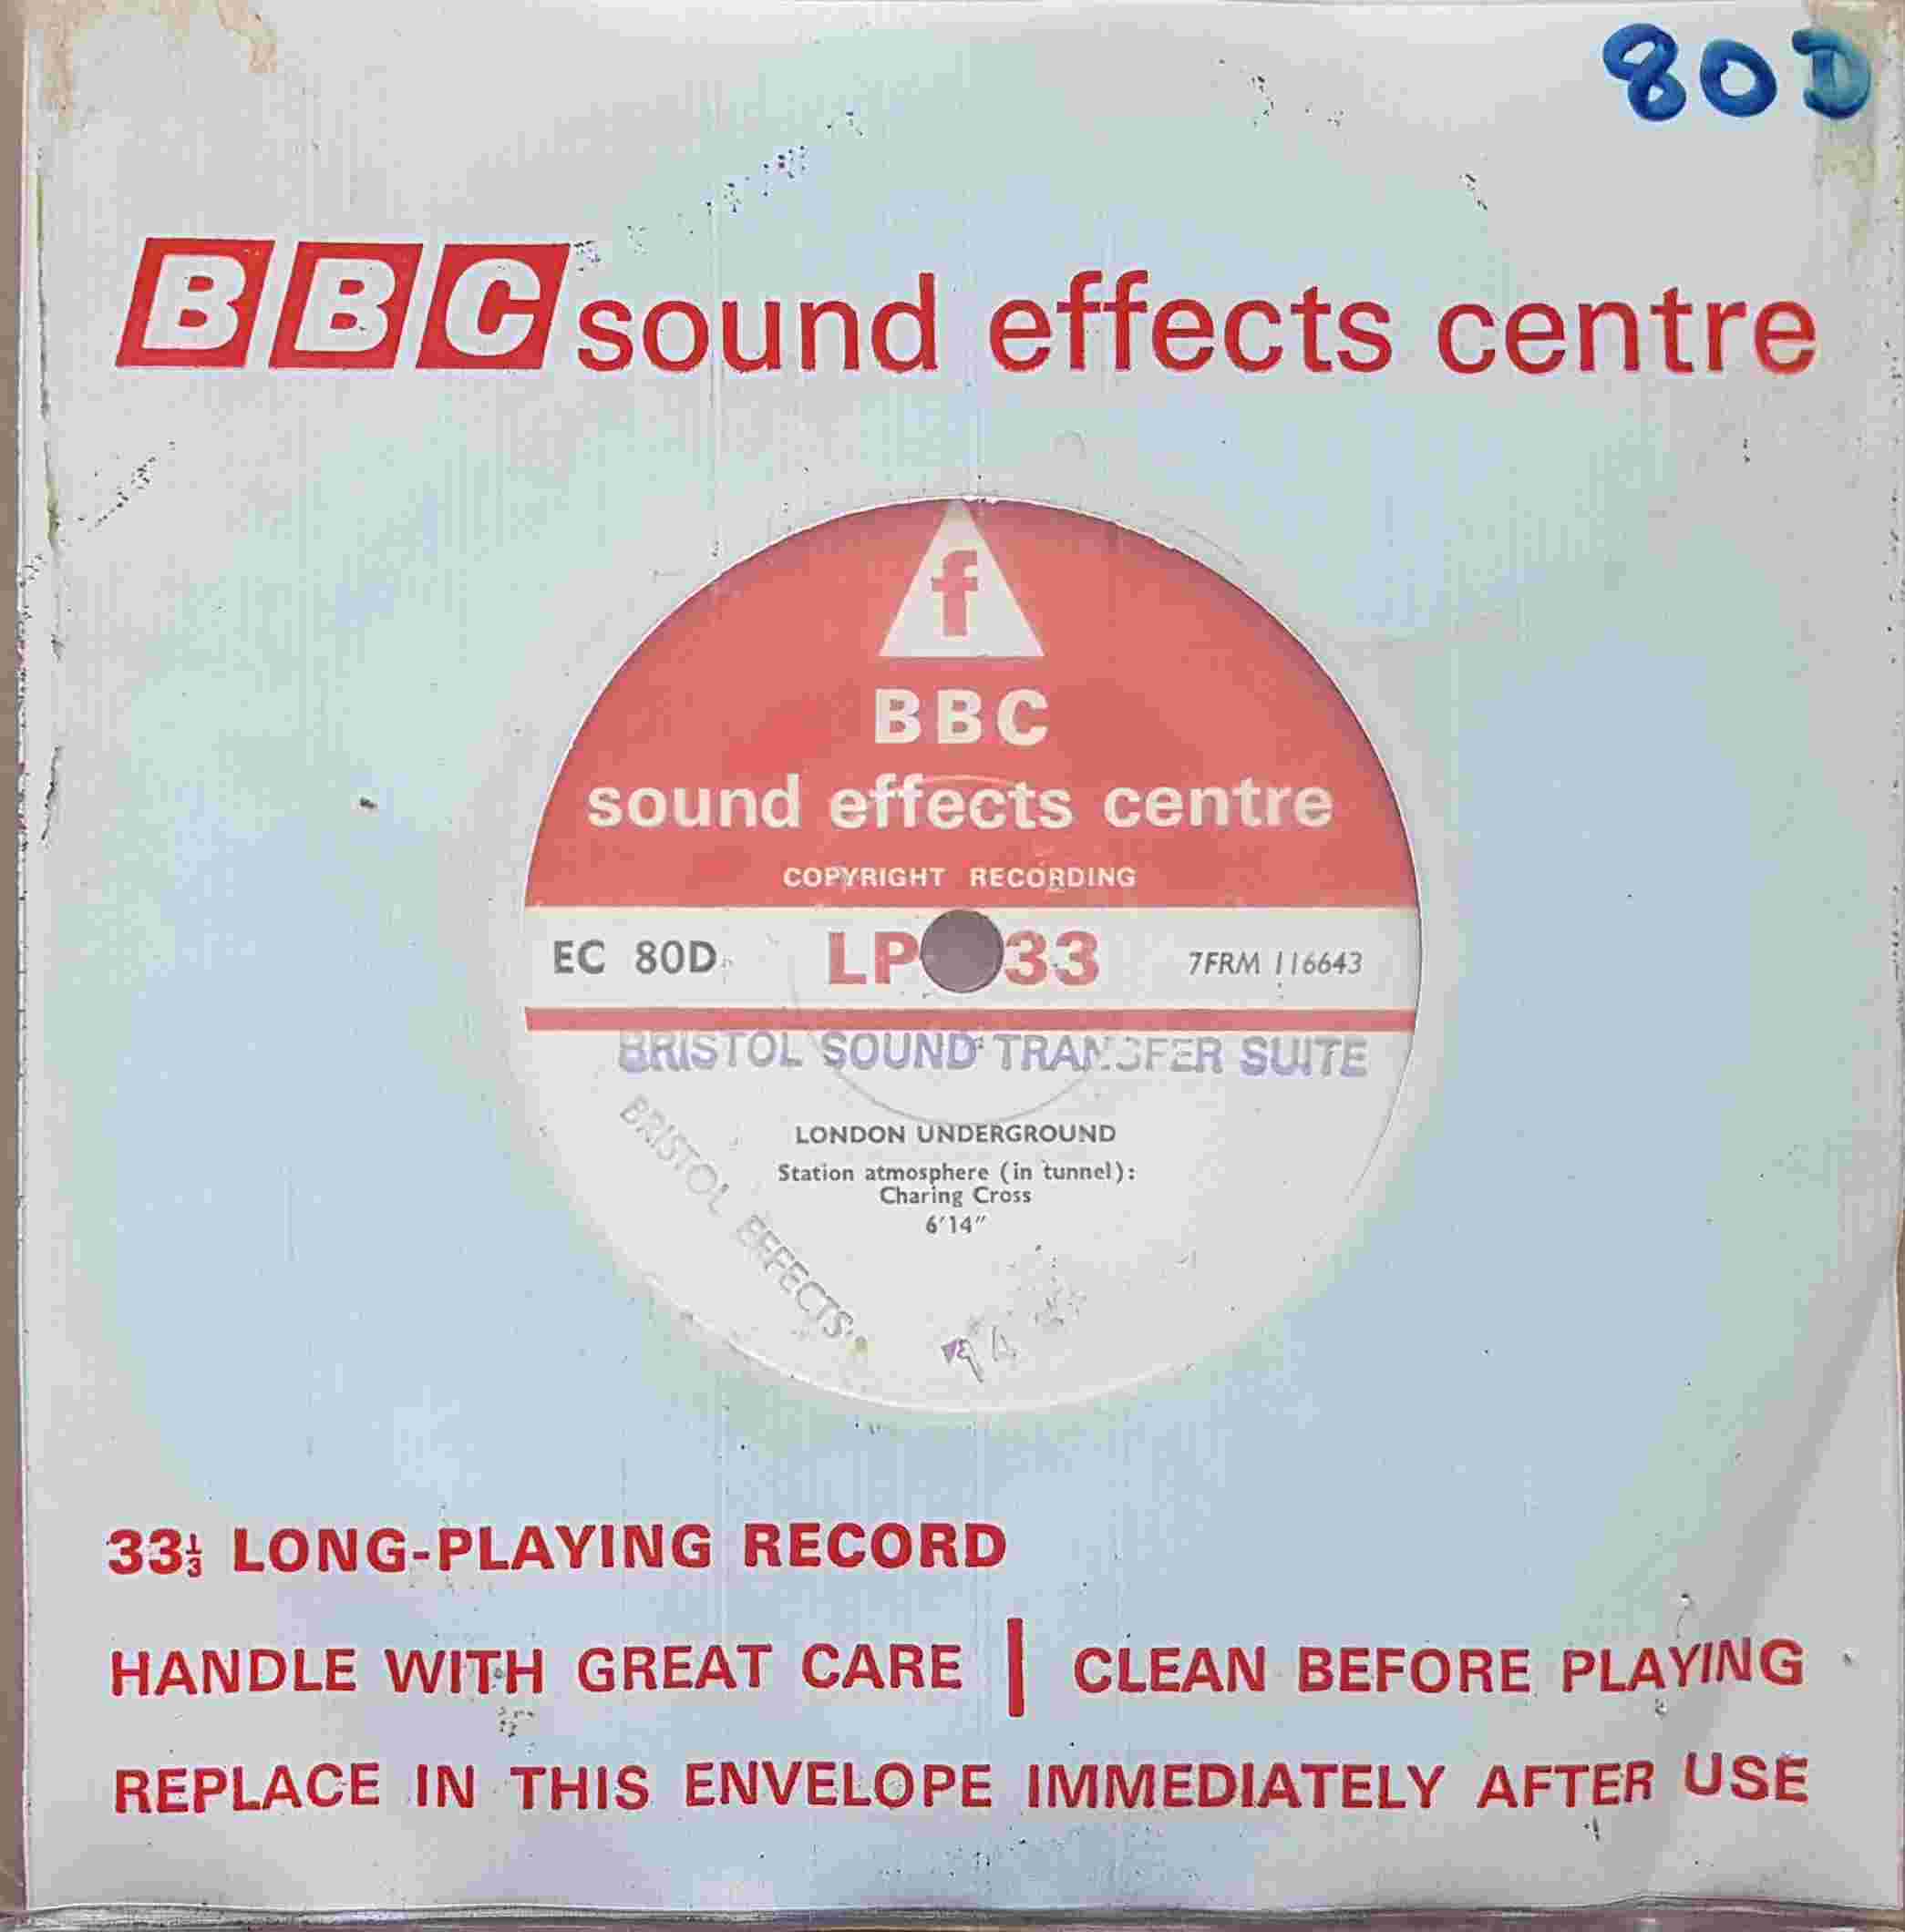 Picture of EC 80D London Underground by artist Not registered from the BBC singles - Records and Tapes library